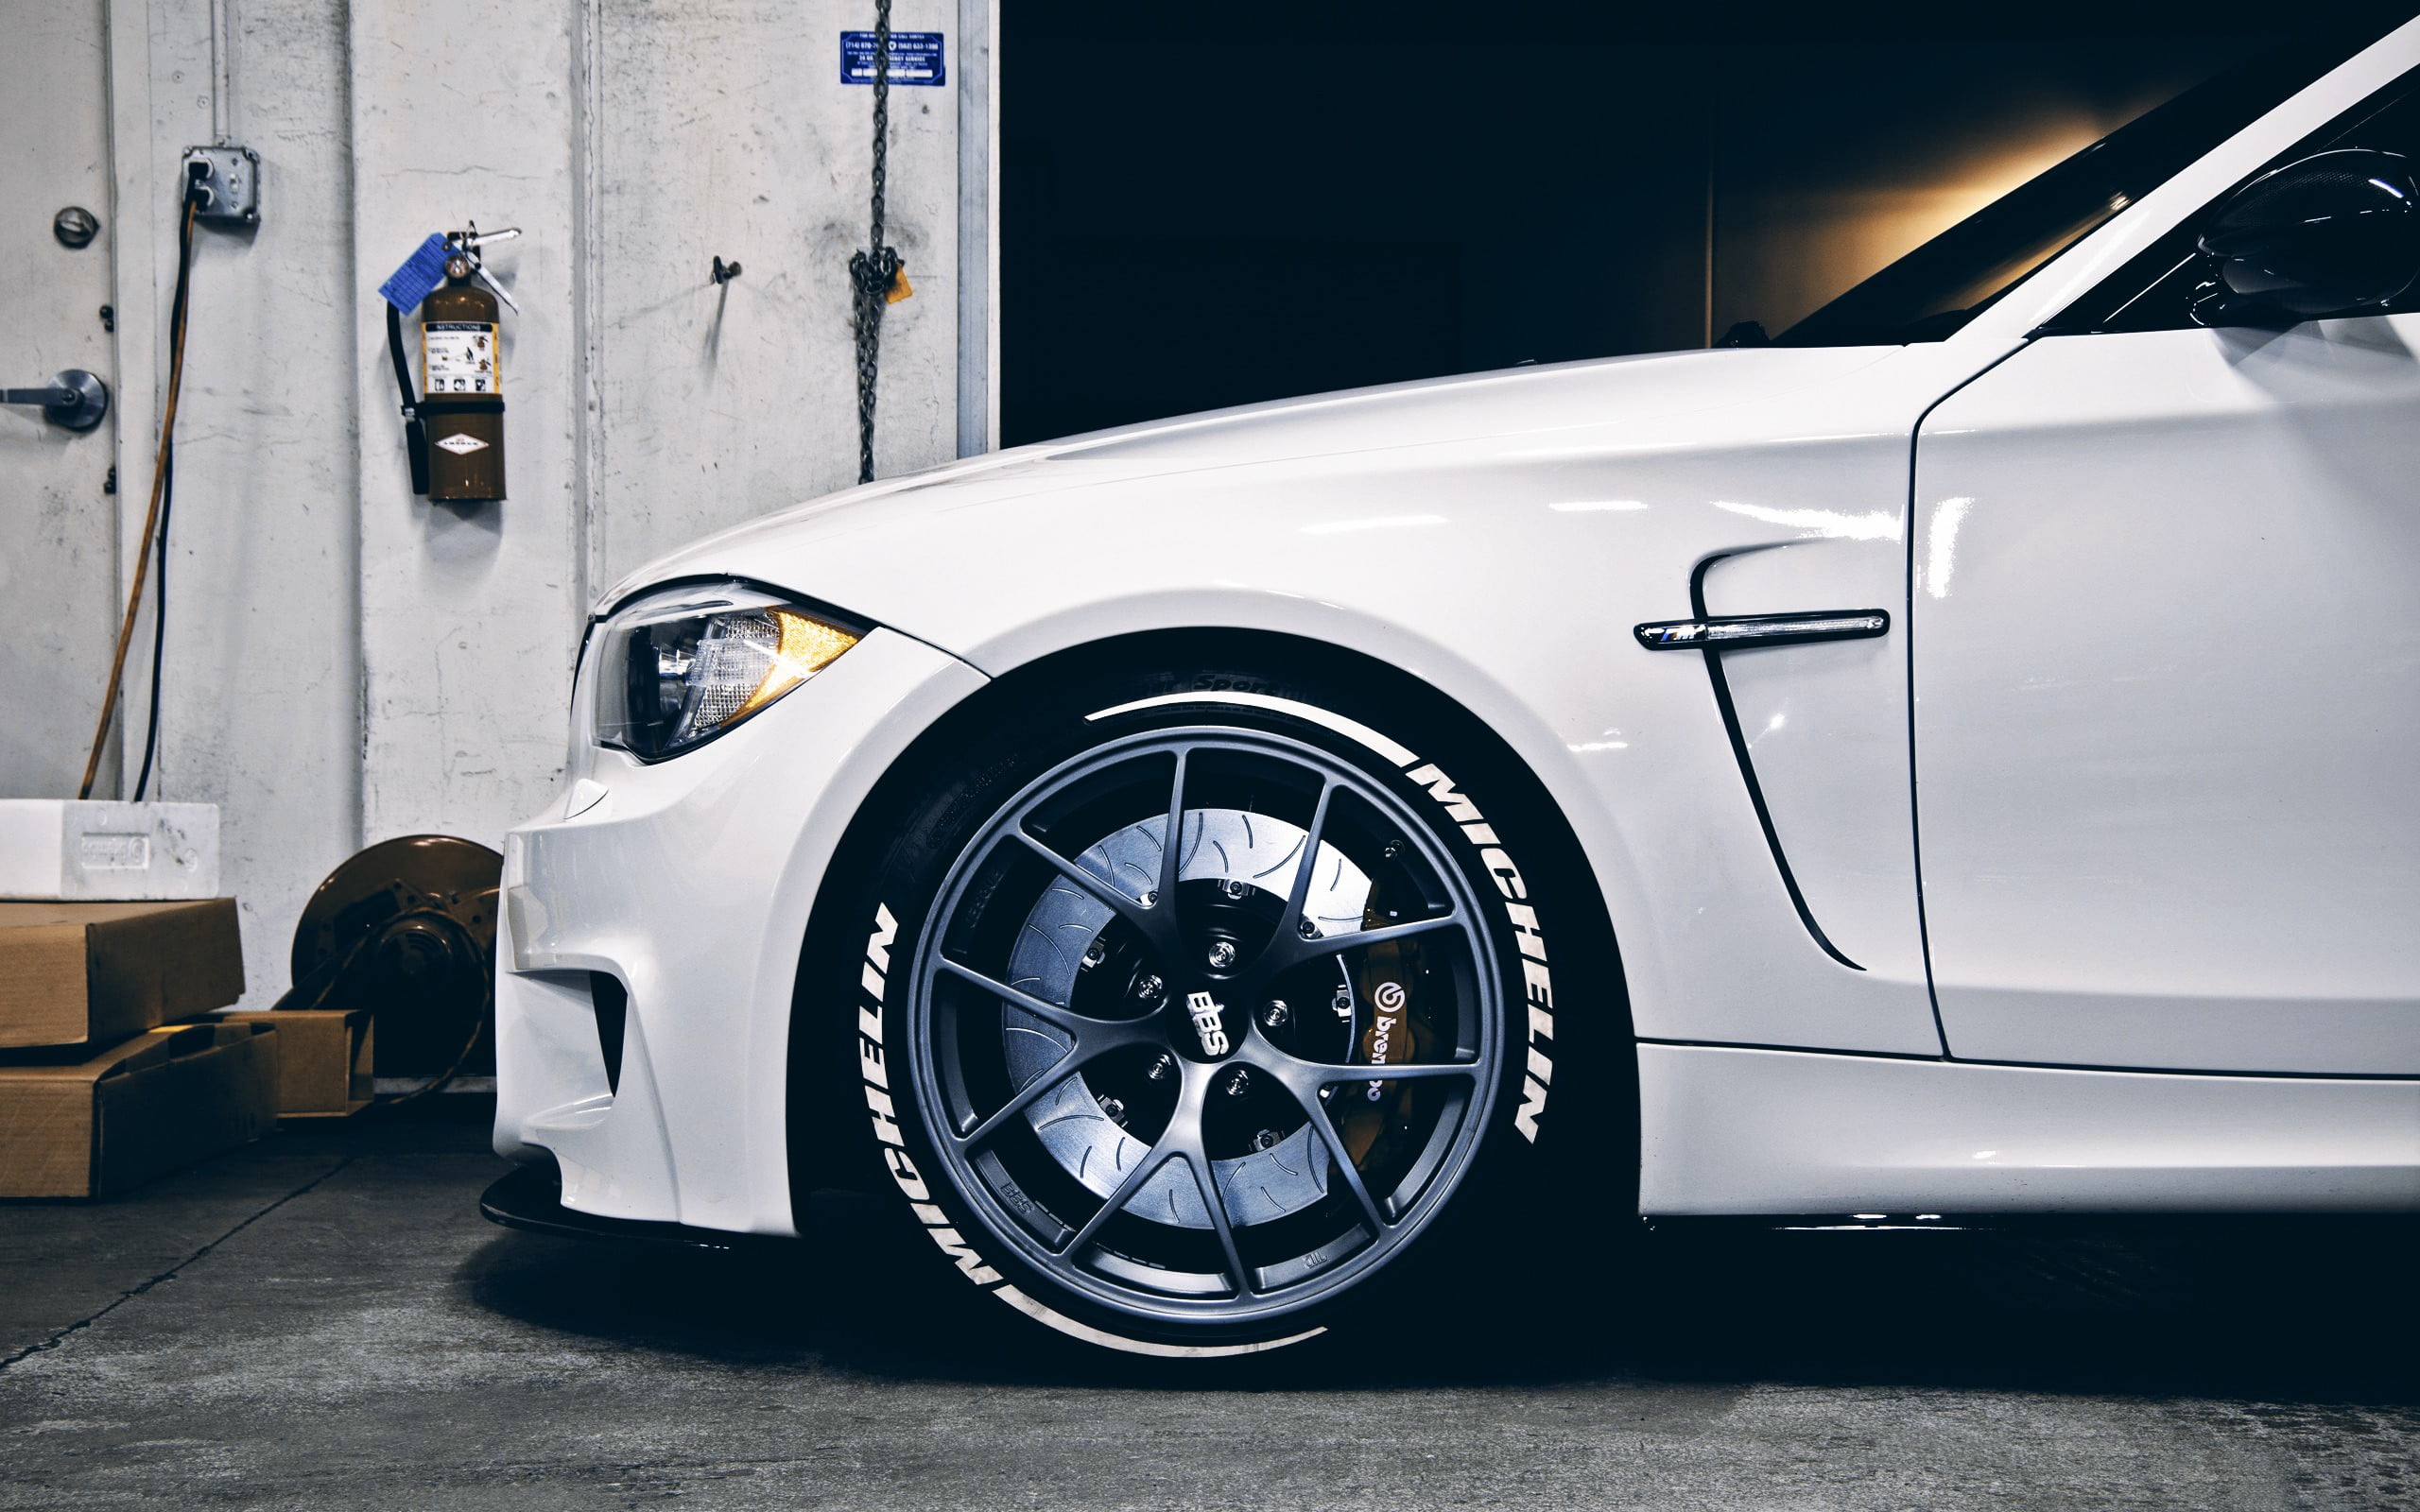 white vehicle, BMW, BMW M1 Coupe, Brembo, Michelin